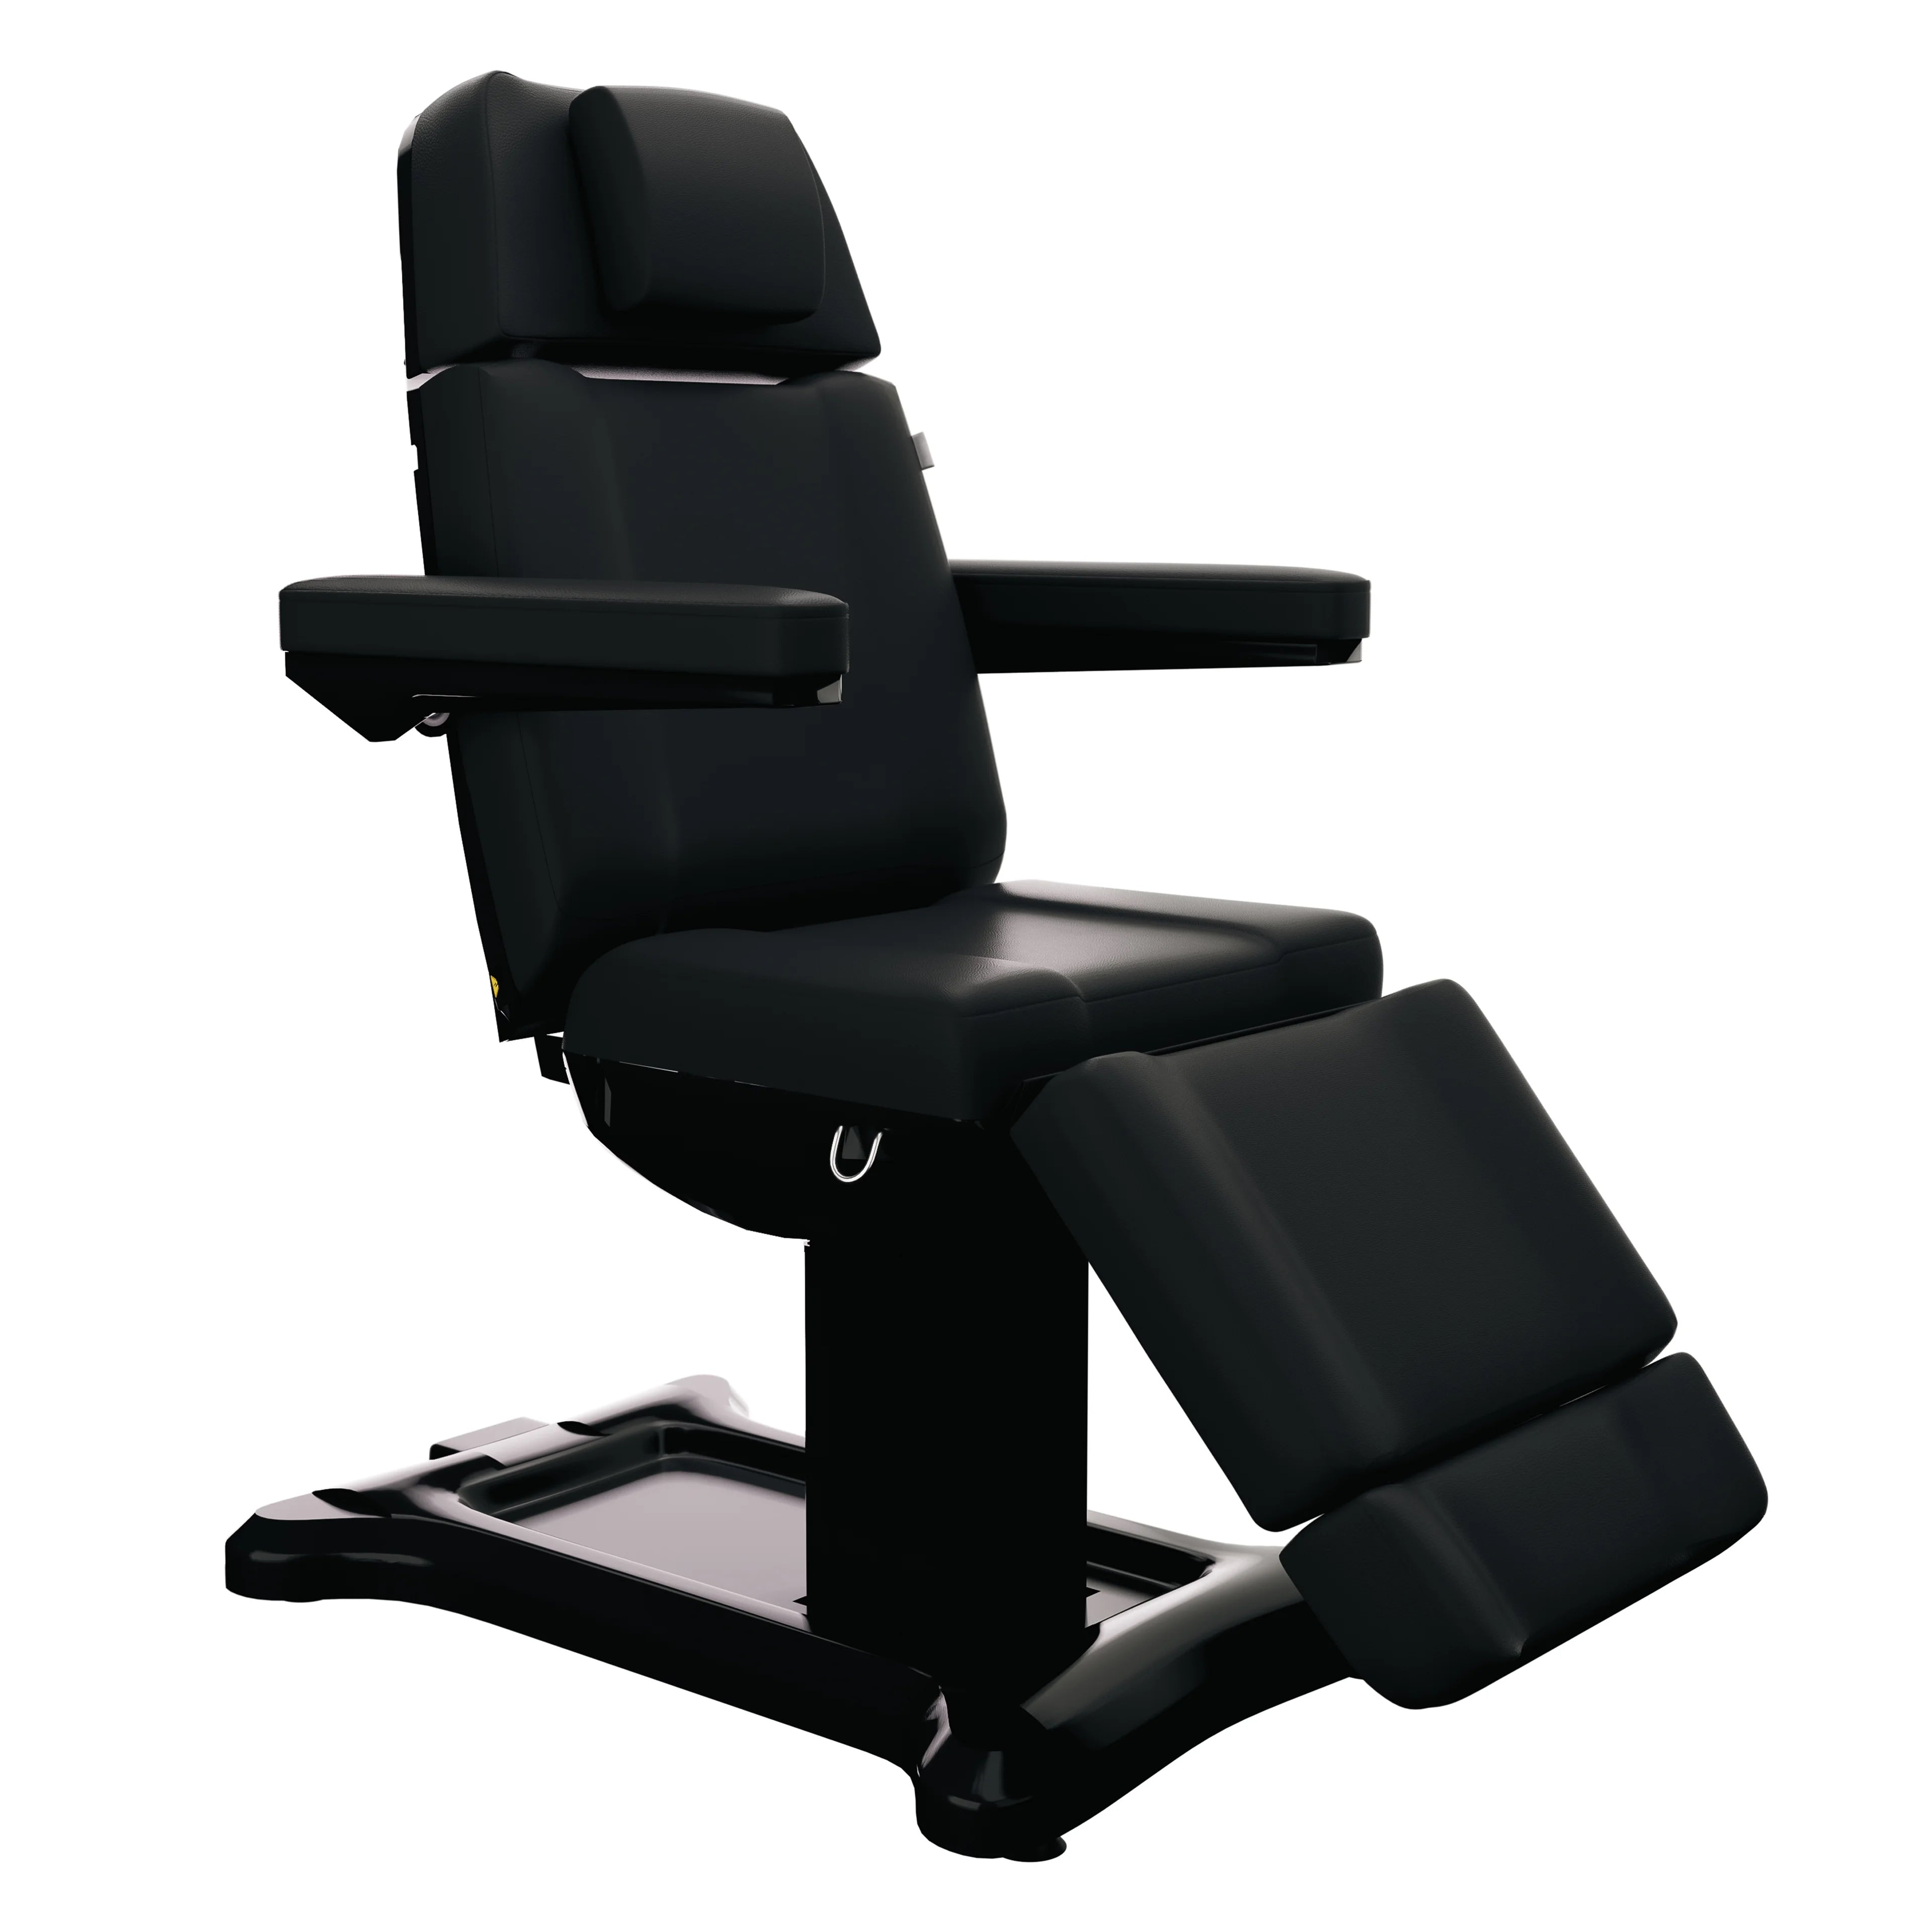 SpaMarc . Tomar (ALL Black) . 3 Motor Spa Treatment Chair / Bed